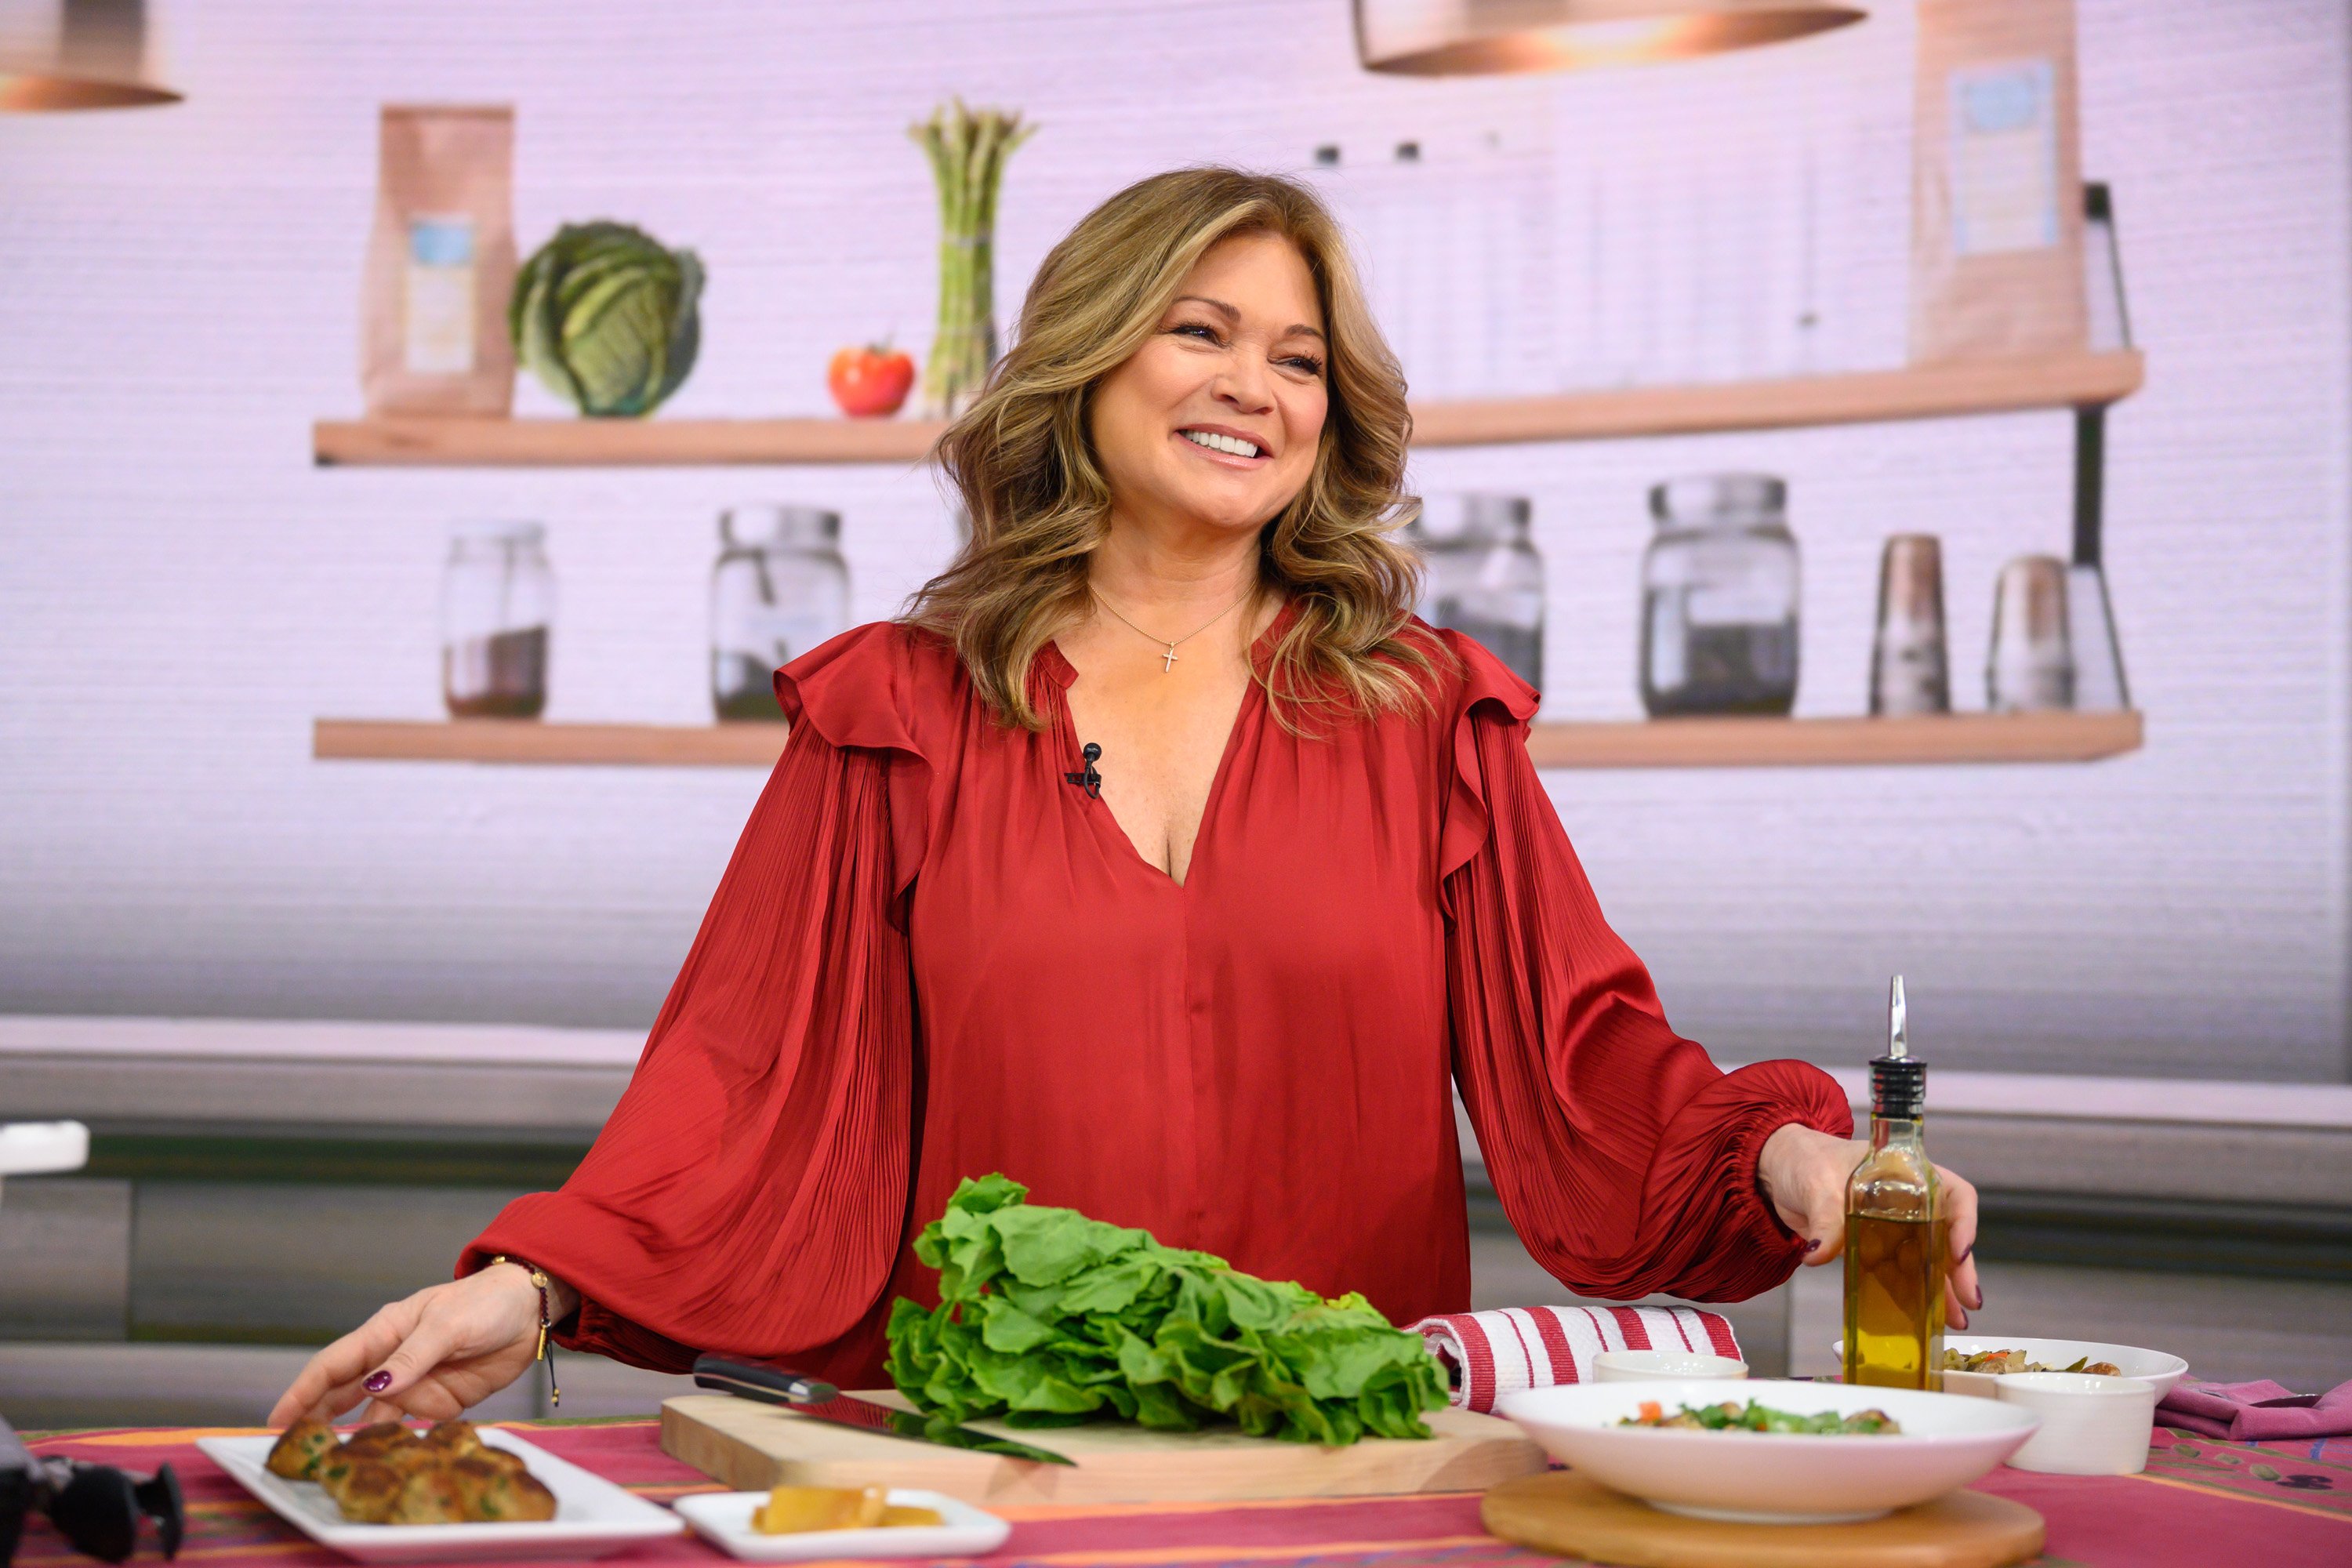 Food Network personality Valerie Bertinelli wears a red long-sleeved blouse in this photograph.